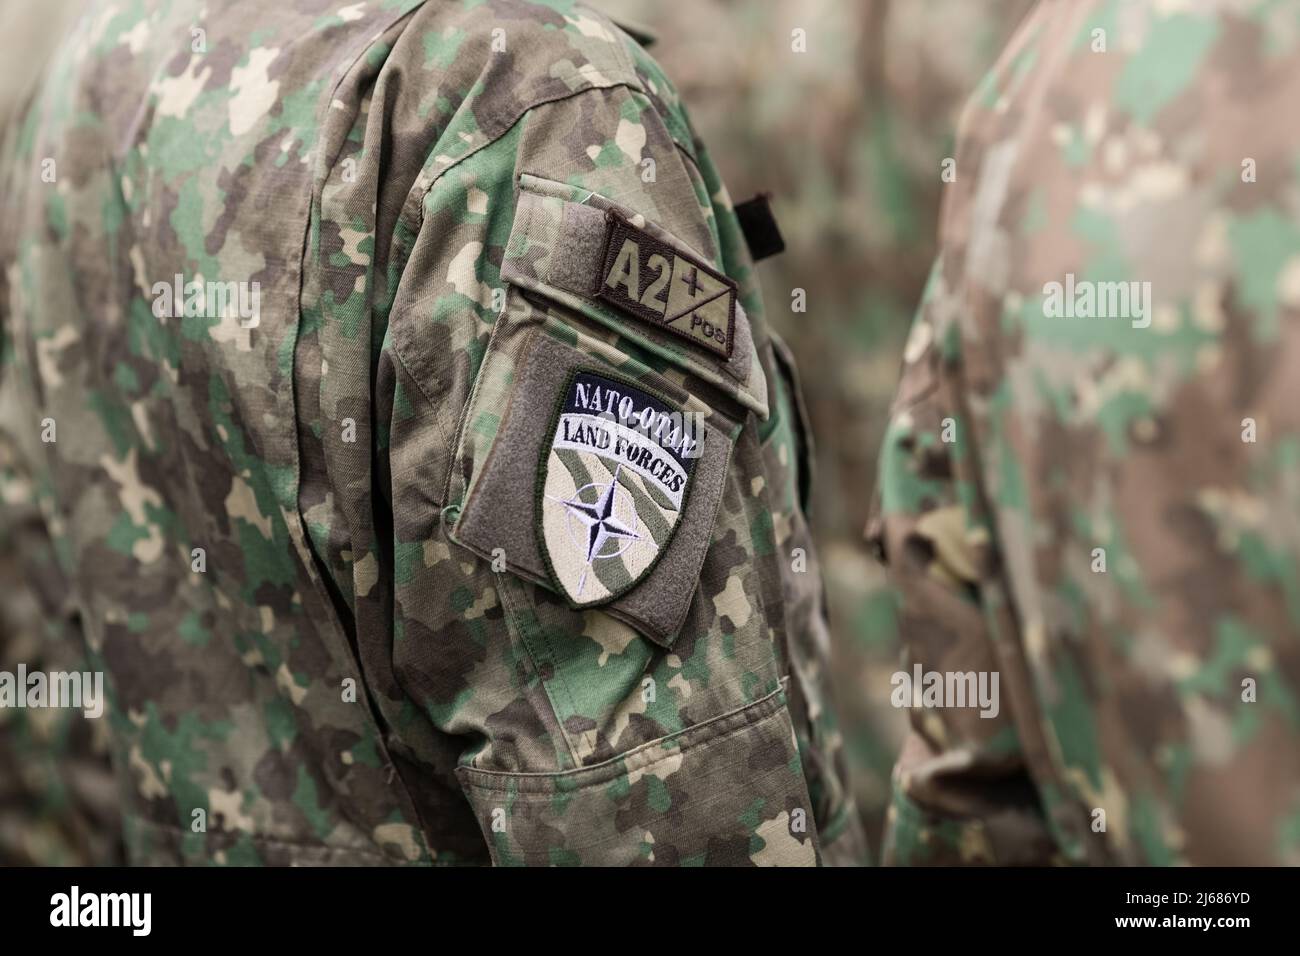 Bucharest, Romania - April 28, 2022: Shallow depth of field details with a Romanian soldier NATO armband (brassard, armlet). Stock Photo